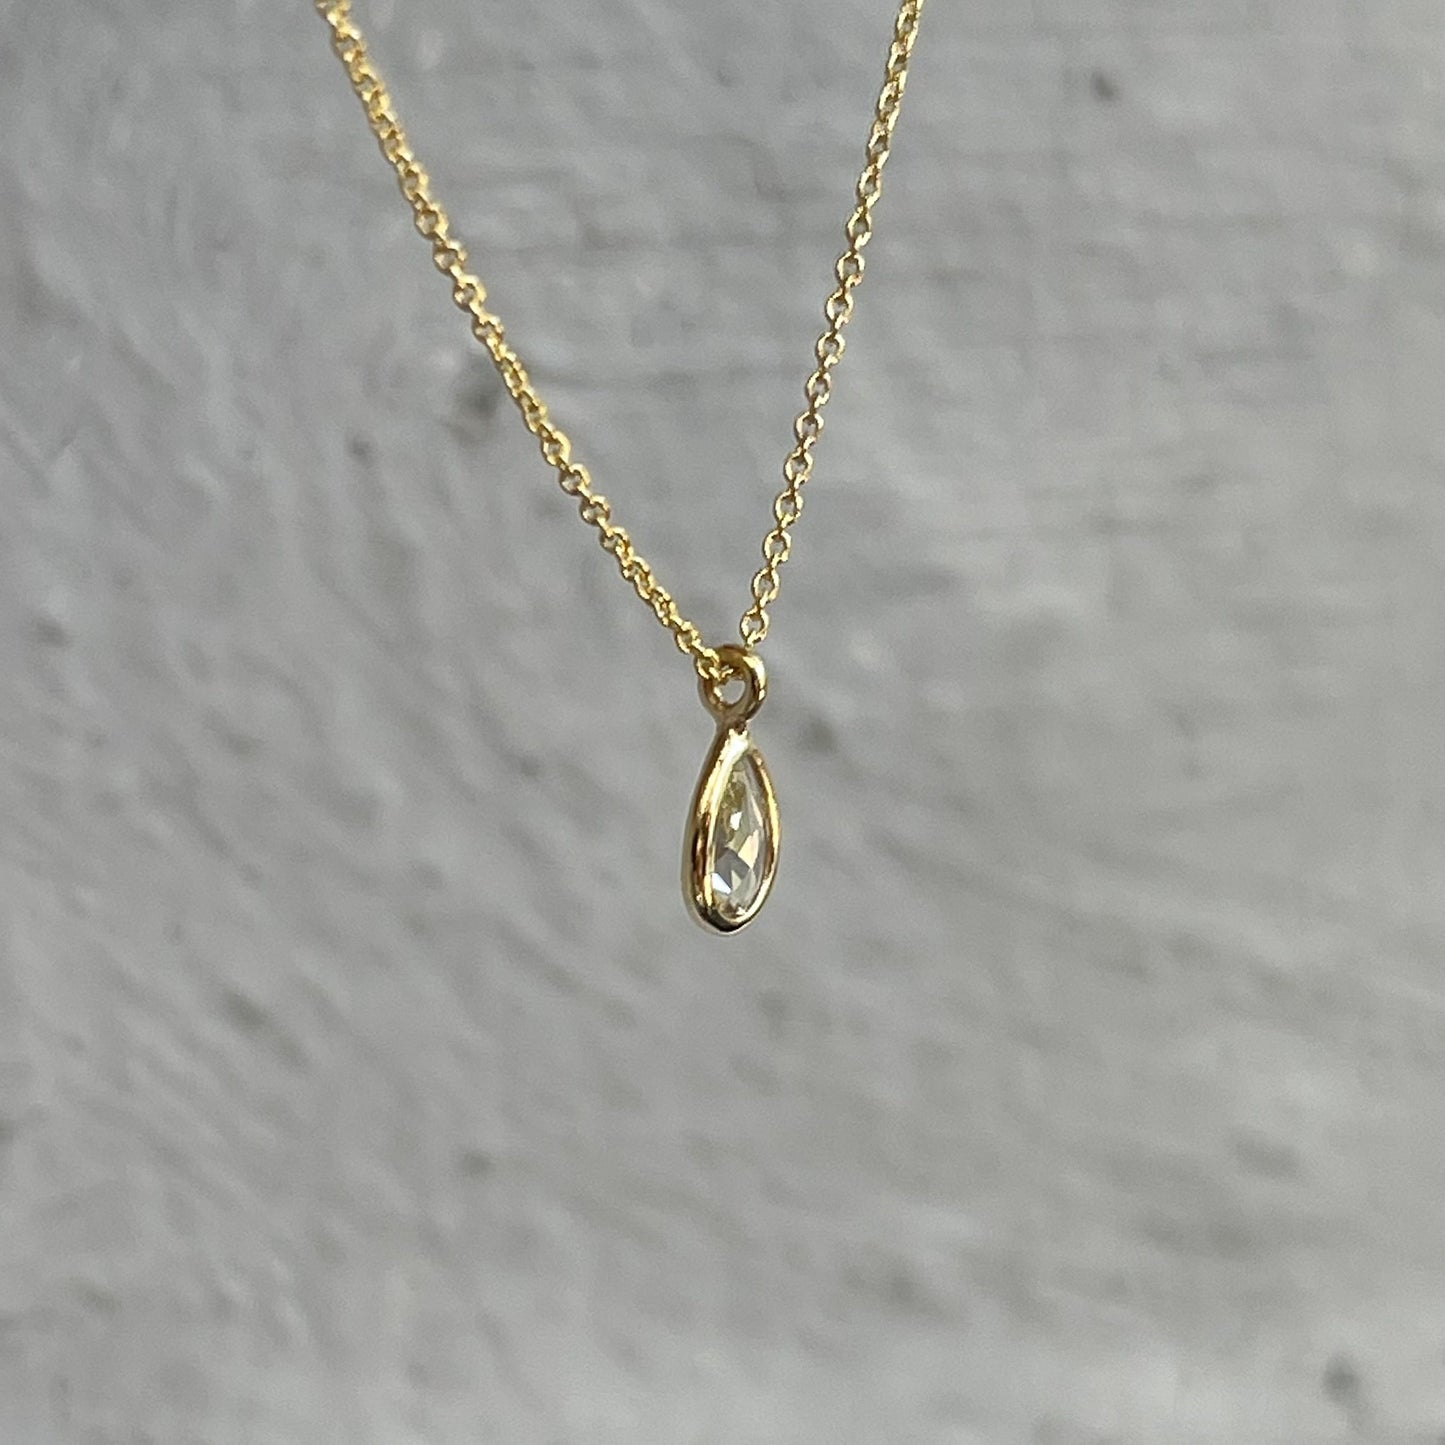 Side view of a Dainty Diamond Necklace by NIXIN Jewelry with a pear shaped diamond pendant.